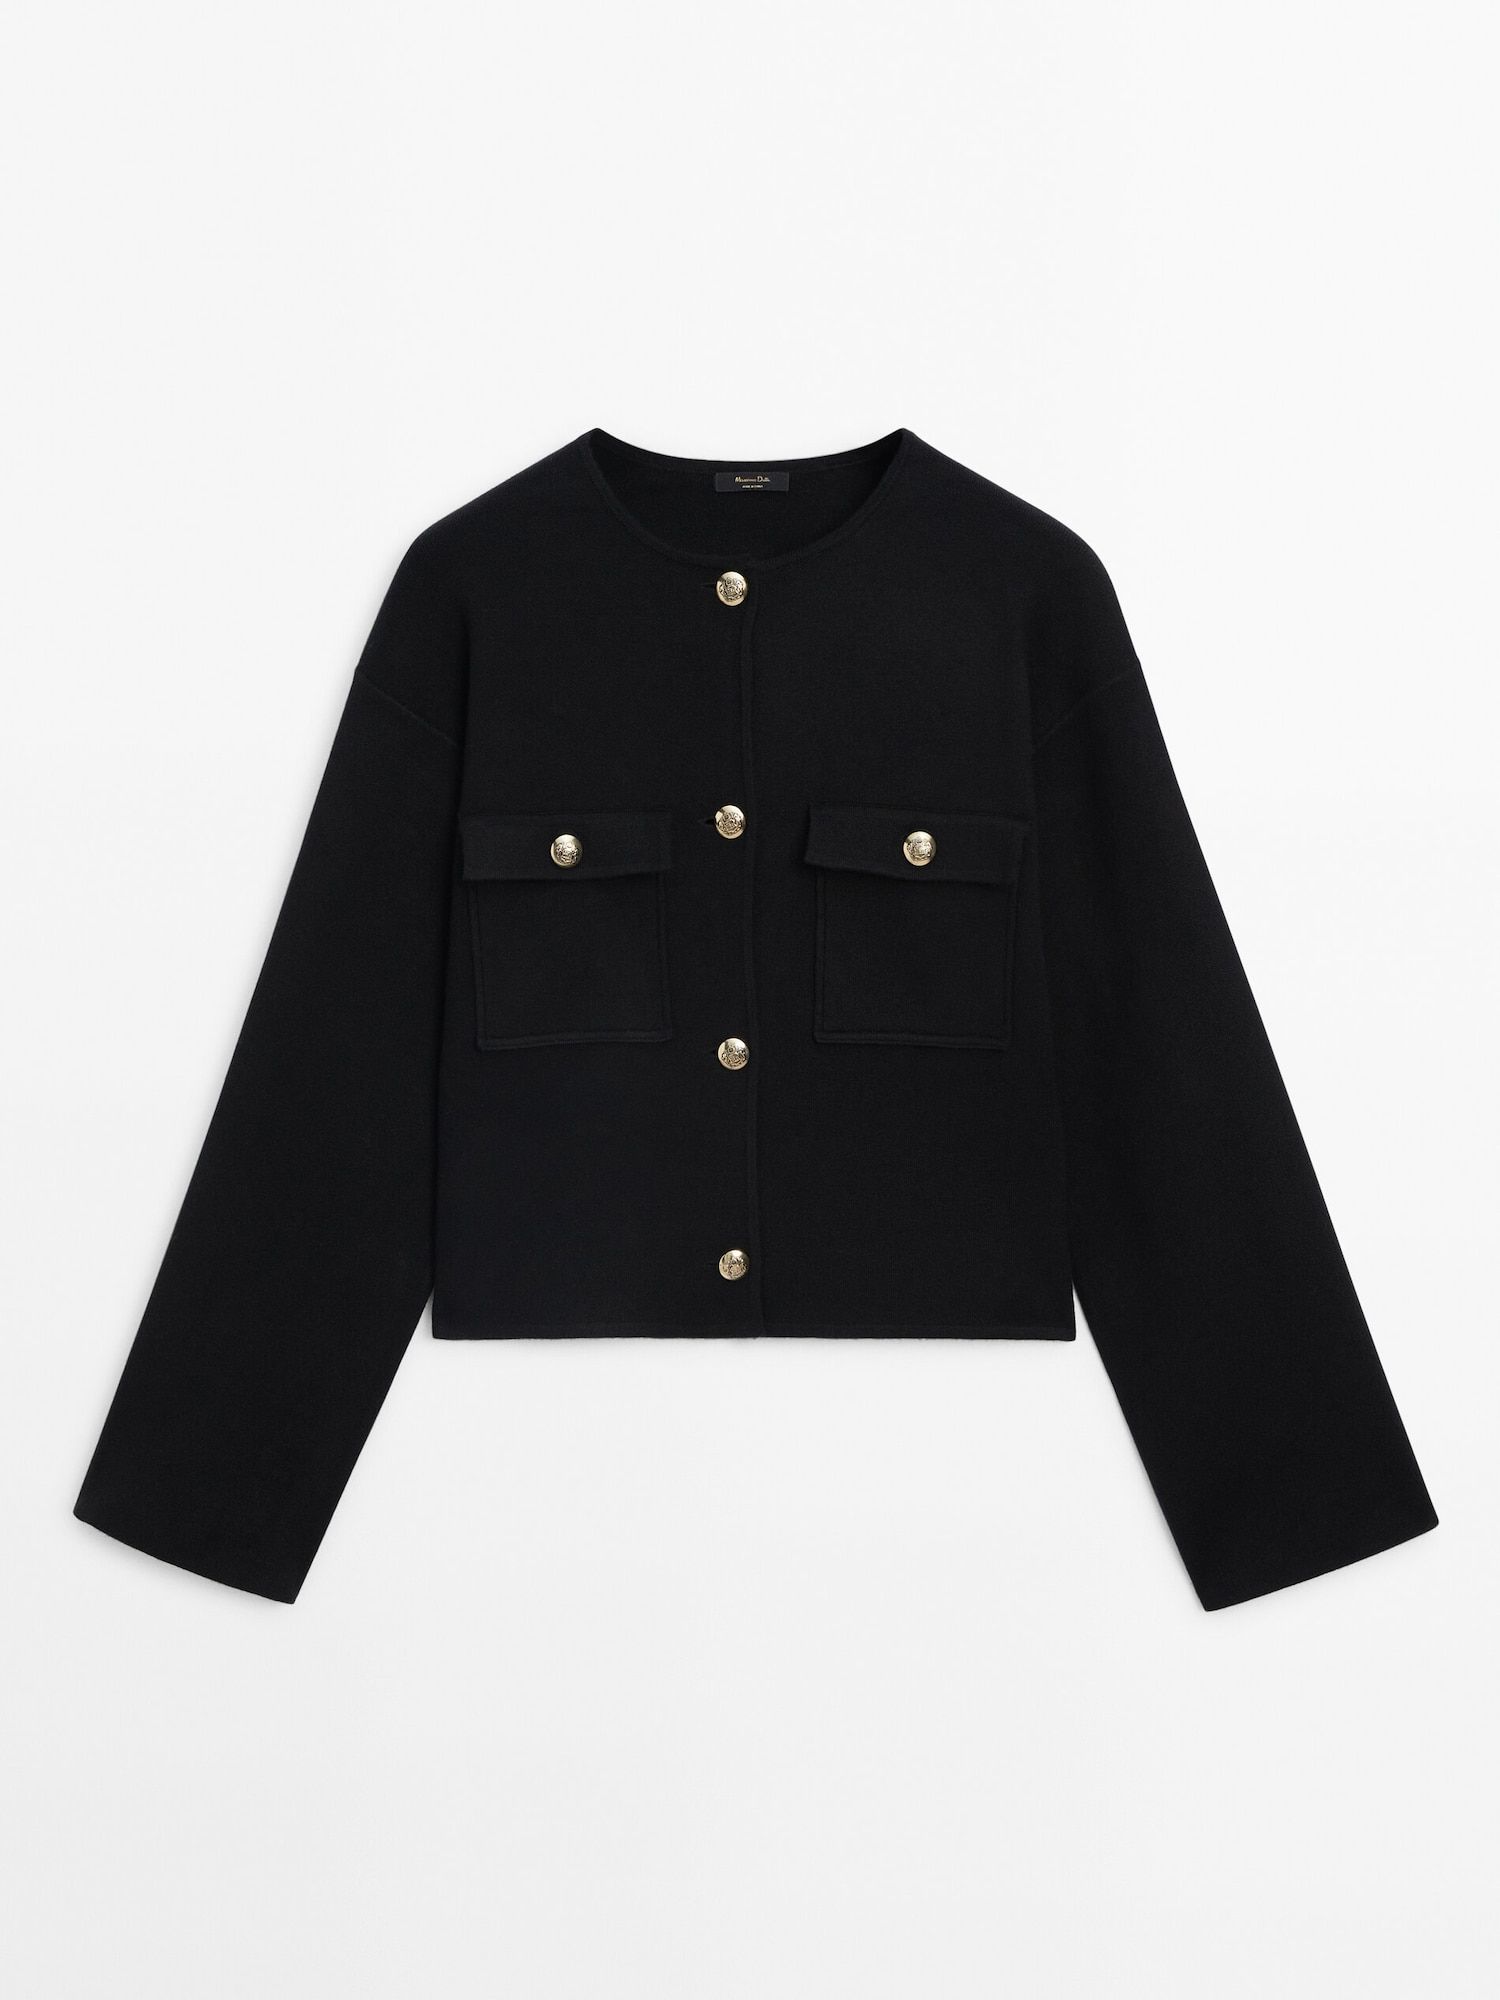 Knit cardigan with gold buttons | Massimo Dutti (US)